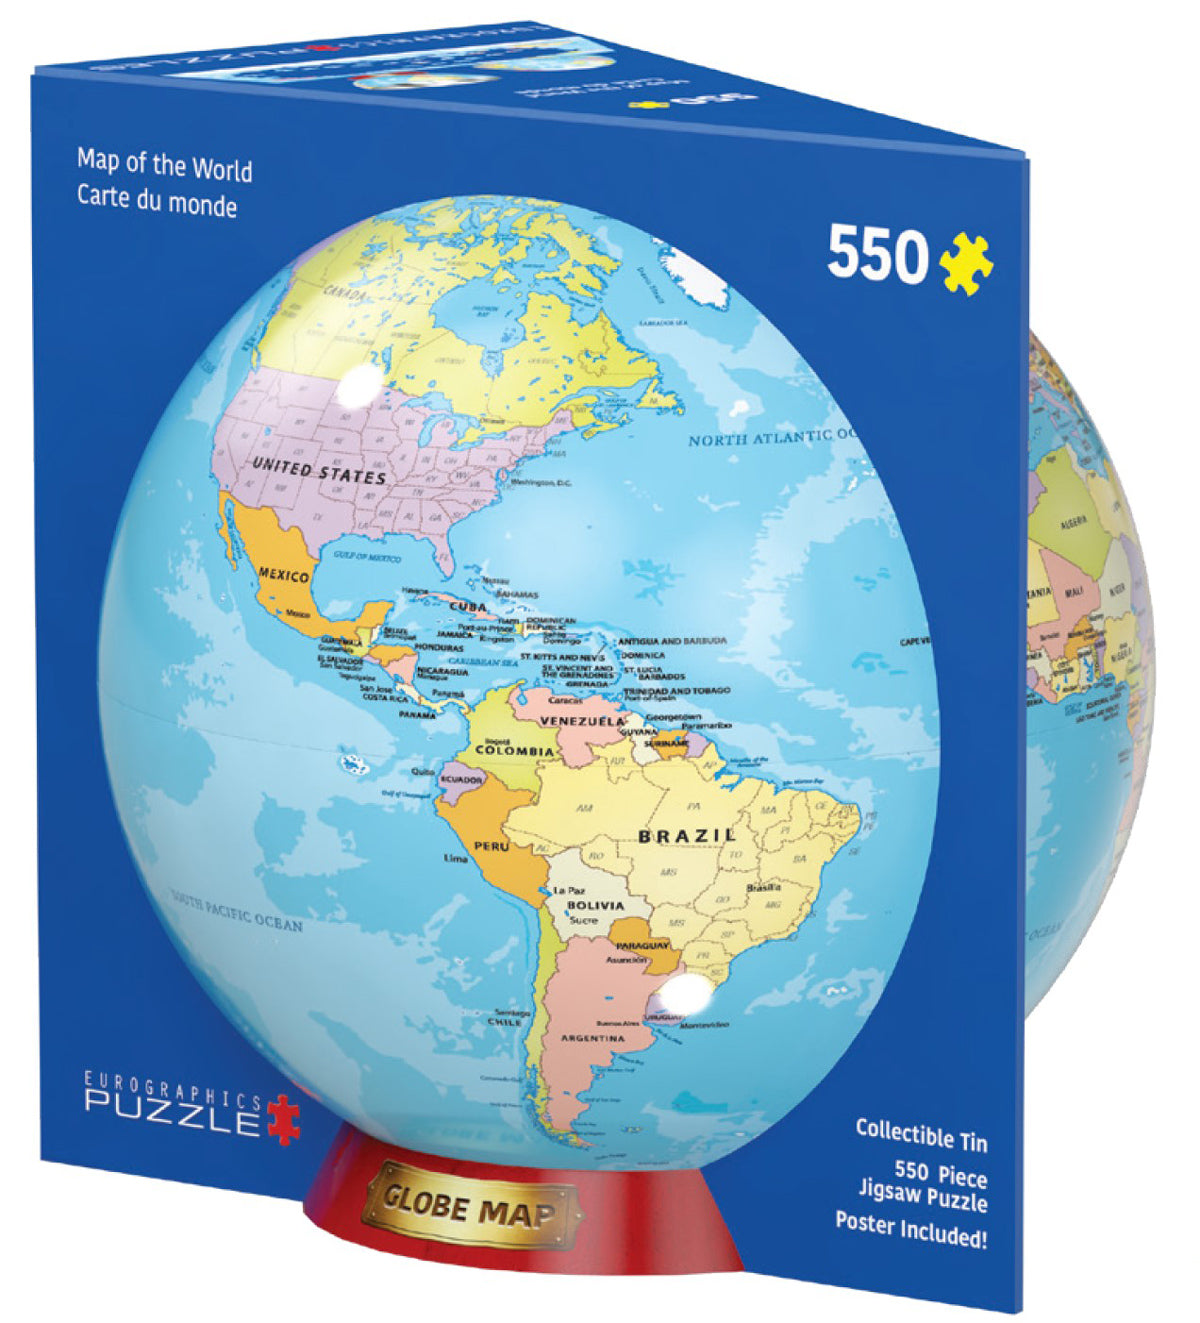 Map of the World Tin 550 Piece Jigsaw Puzzle